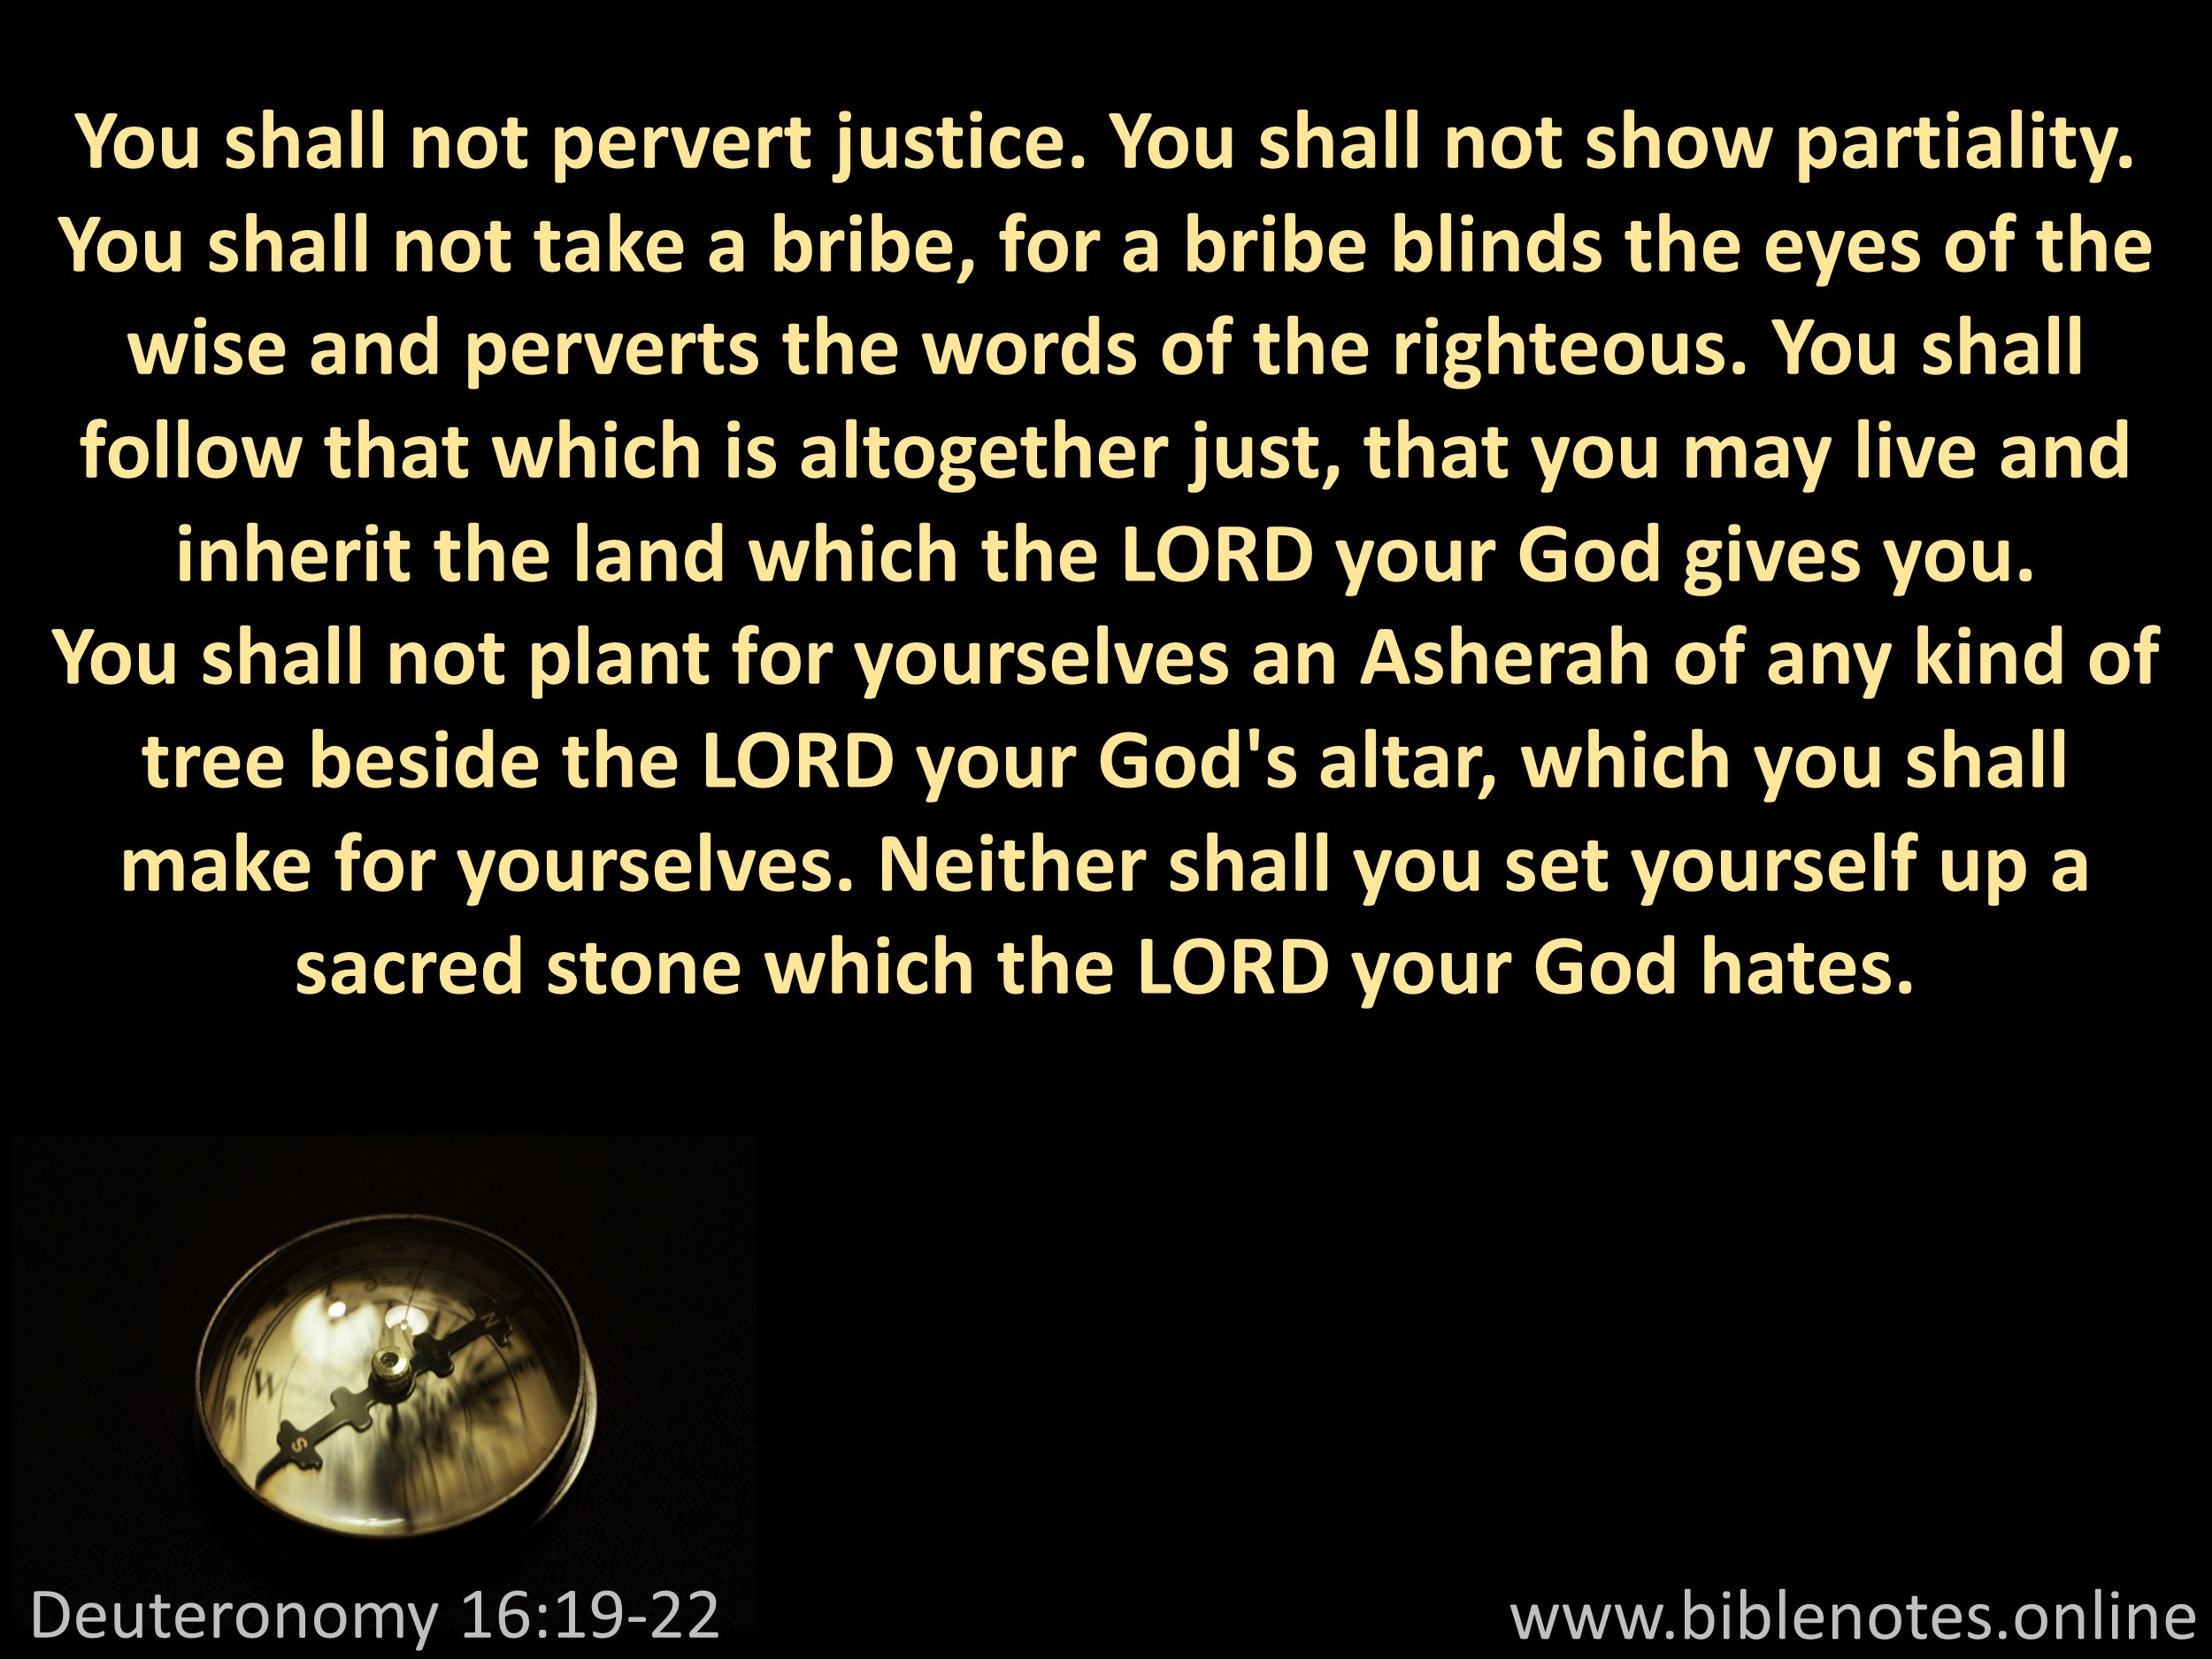 Bible Verse from Deuteronomy Chapter 16